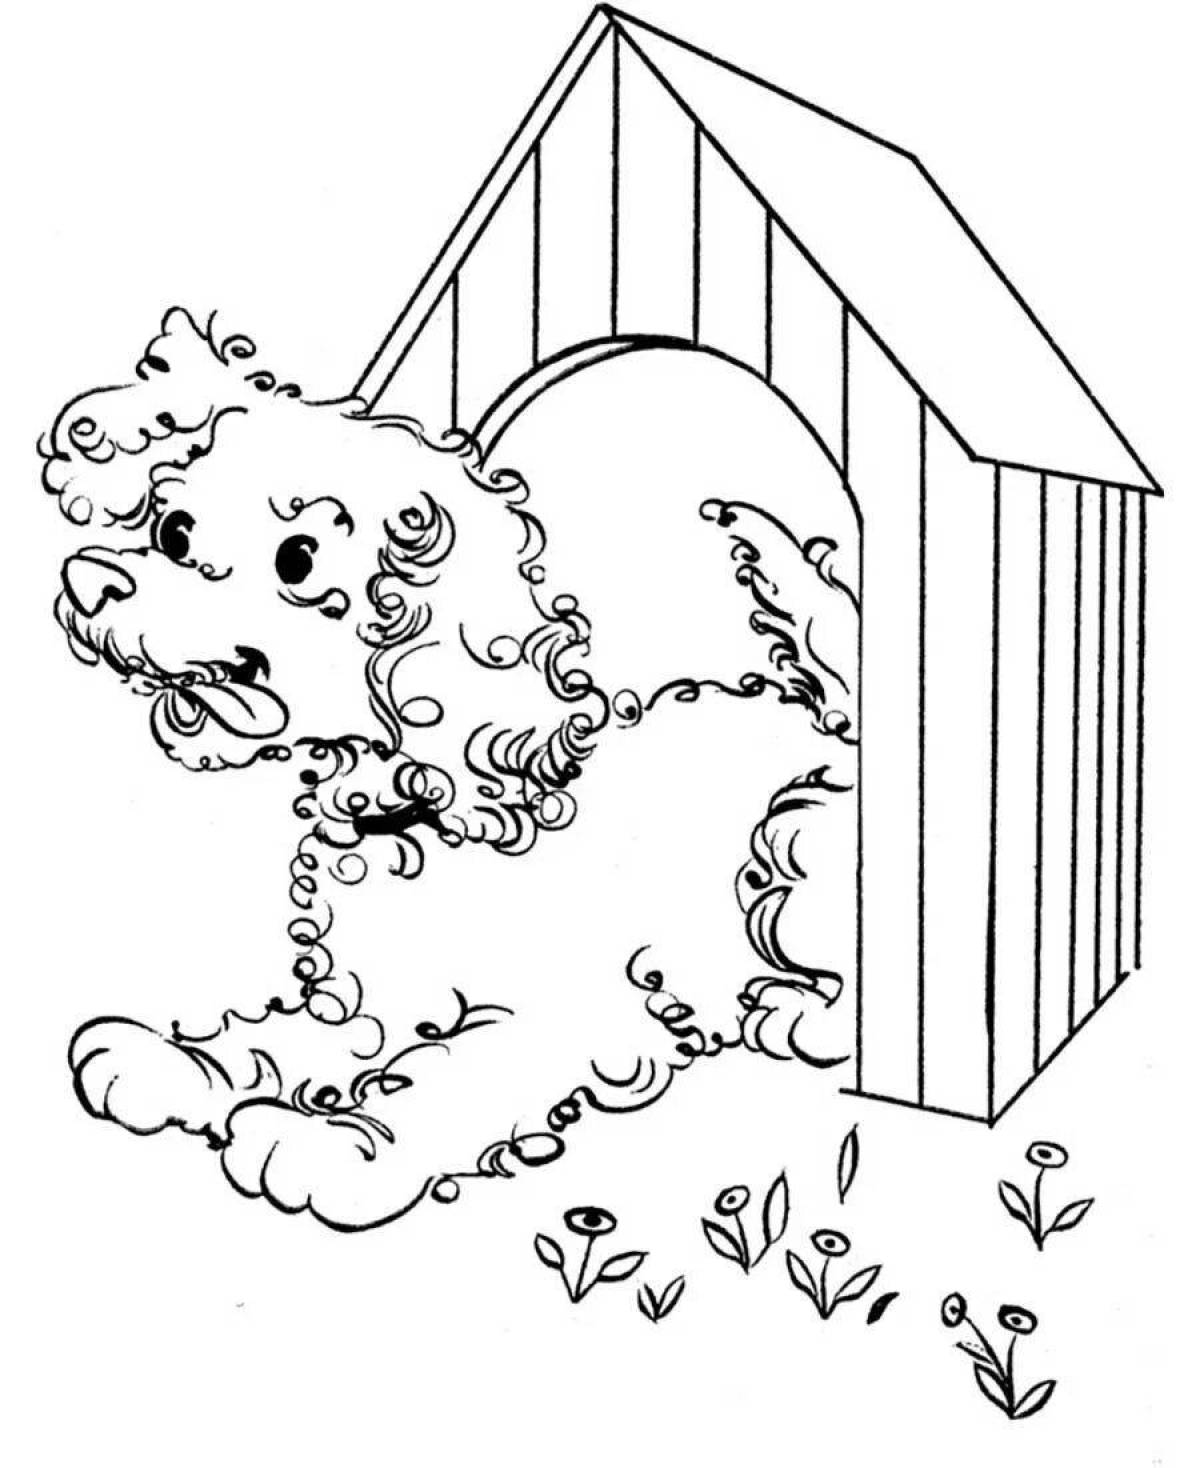 Coloring page cute doghouse